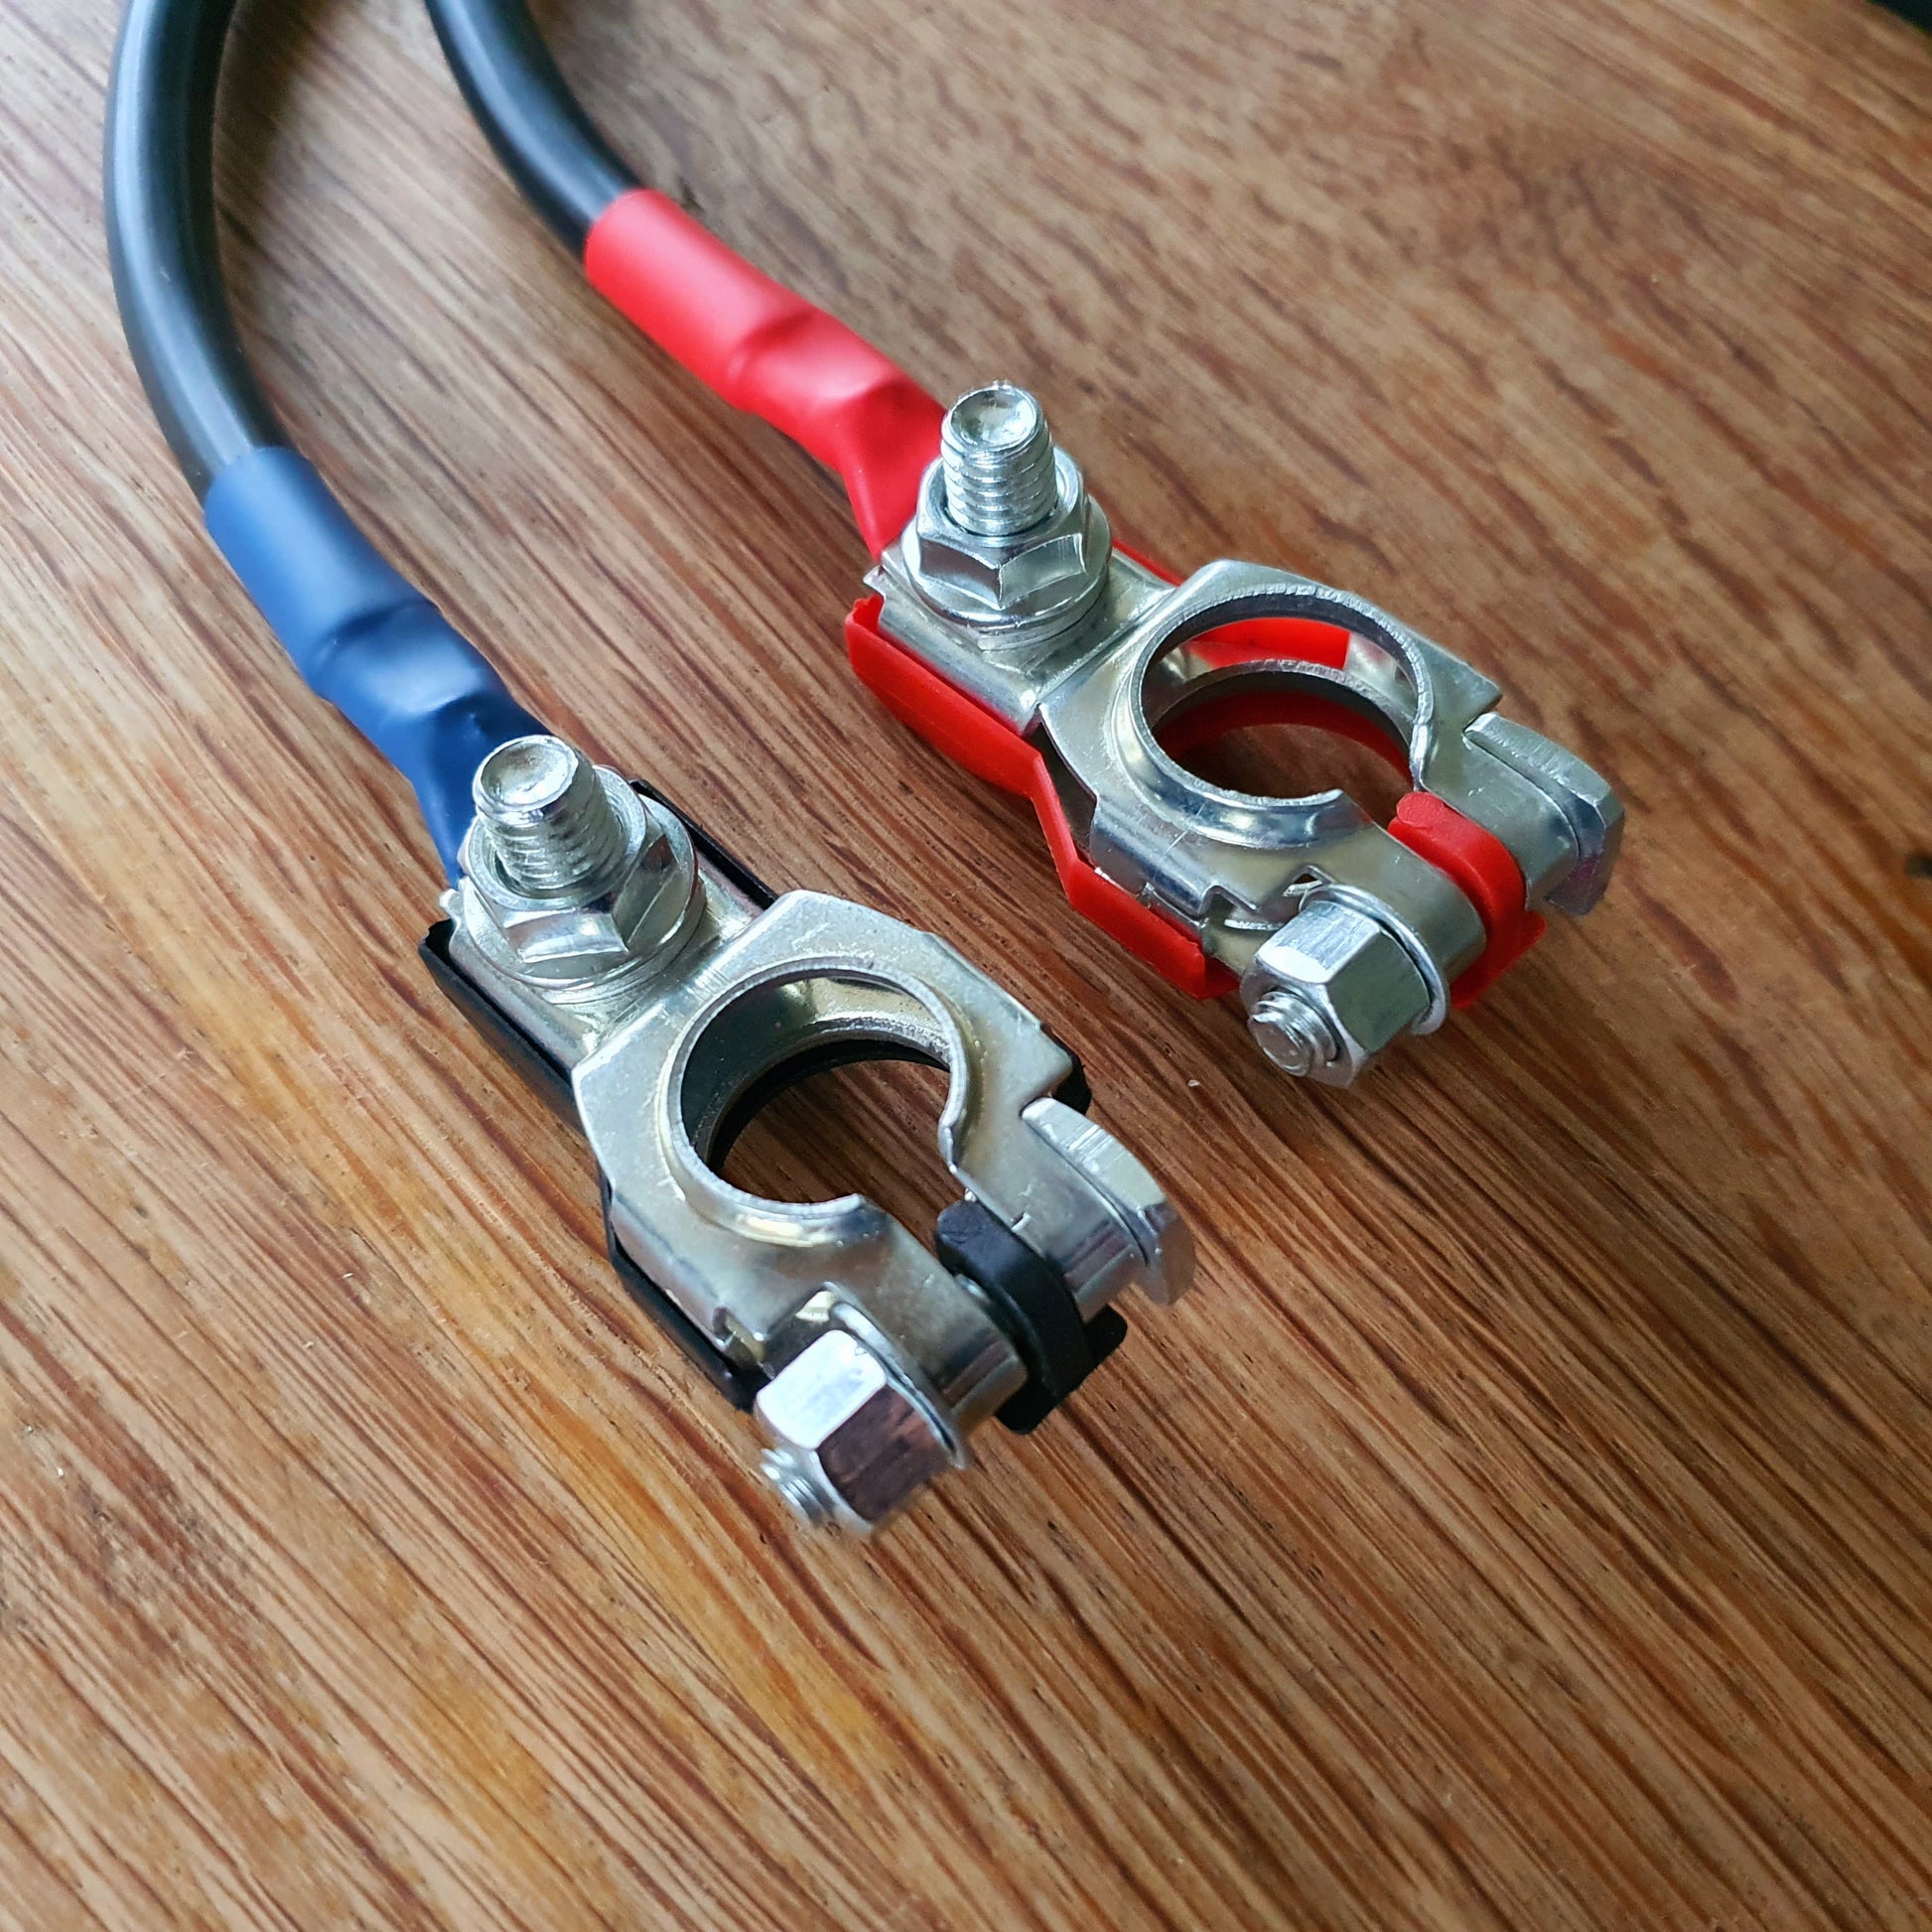 Leisure Battery Parallel Connection Cables 16mm2 Two Way